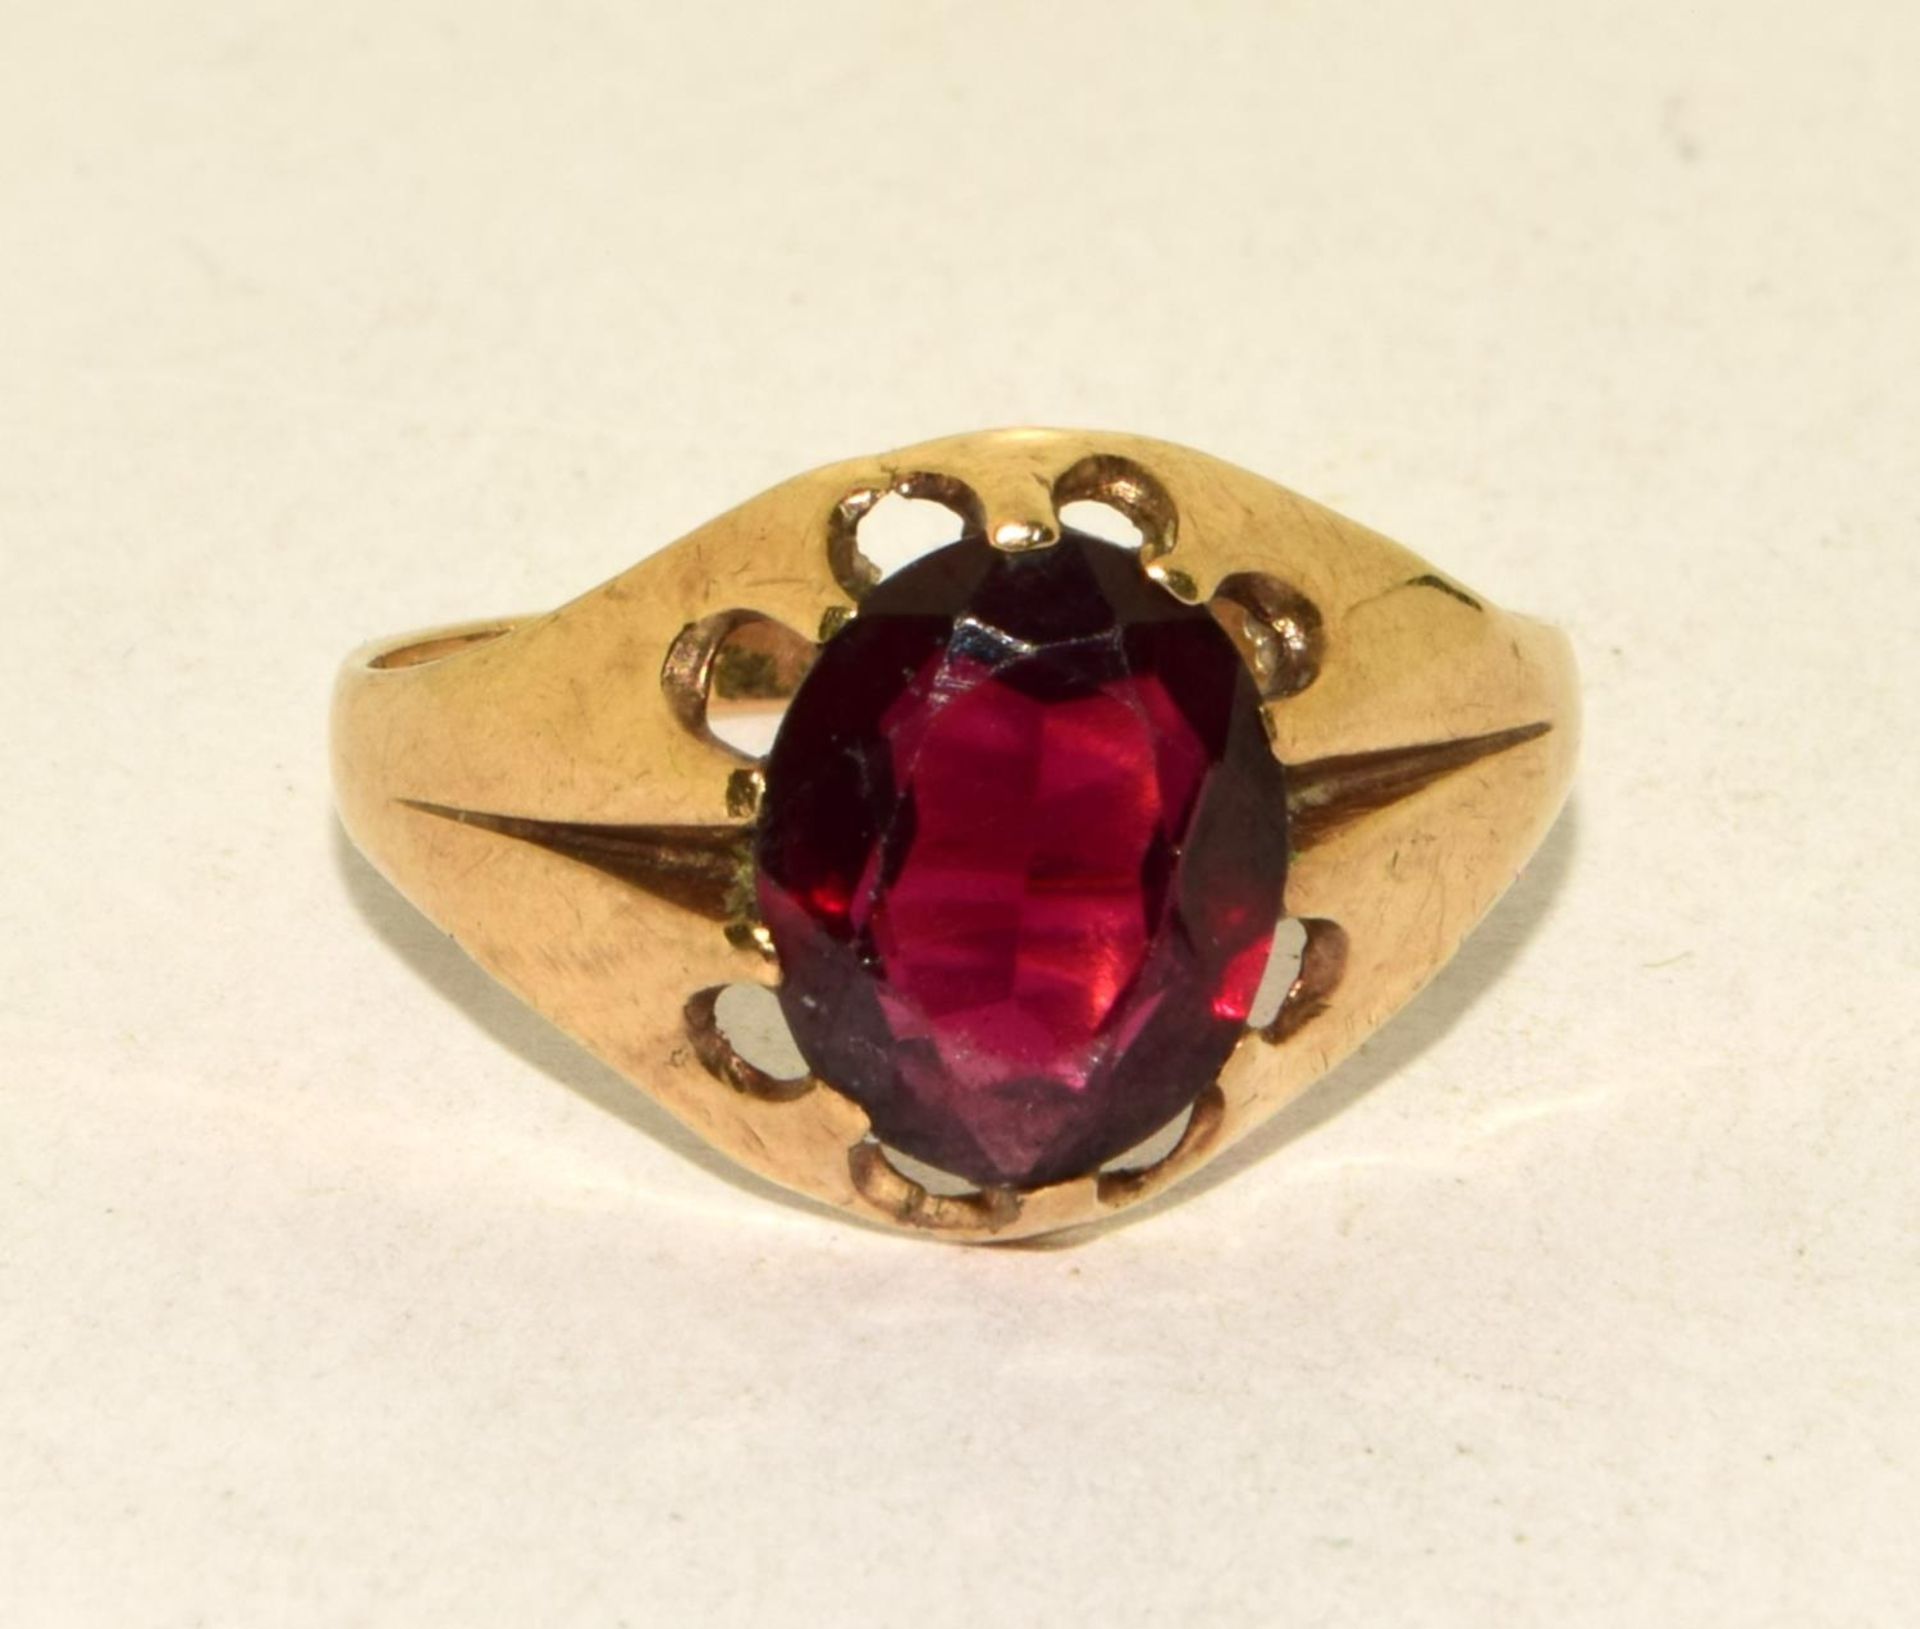 9ct gold gents signet with large Garnet center stone size S ref 62 - Image 5 of 5